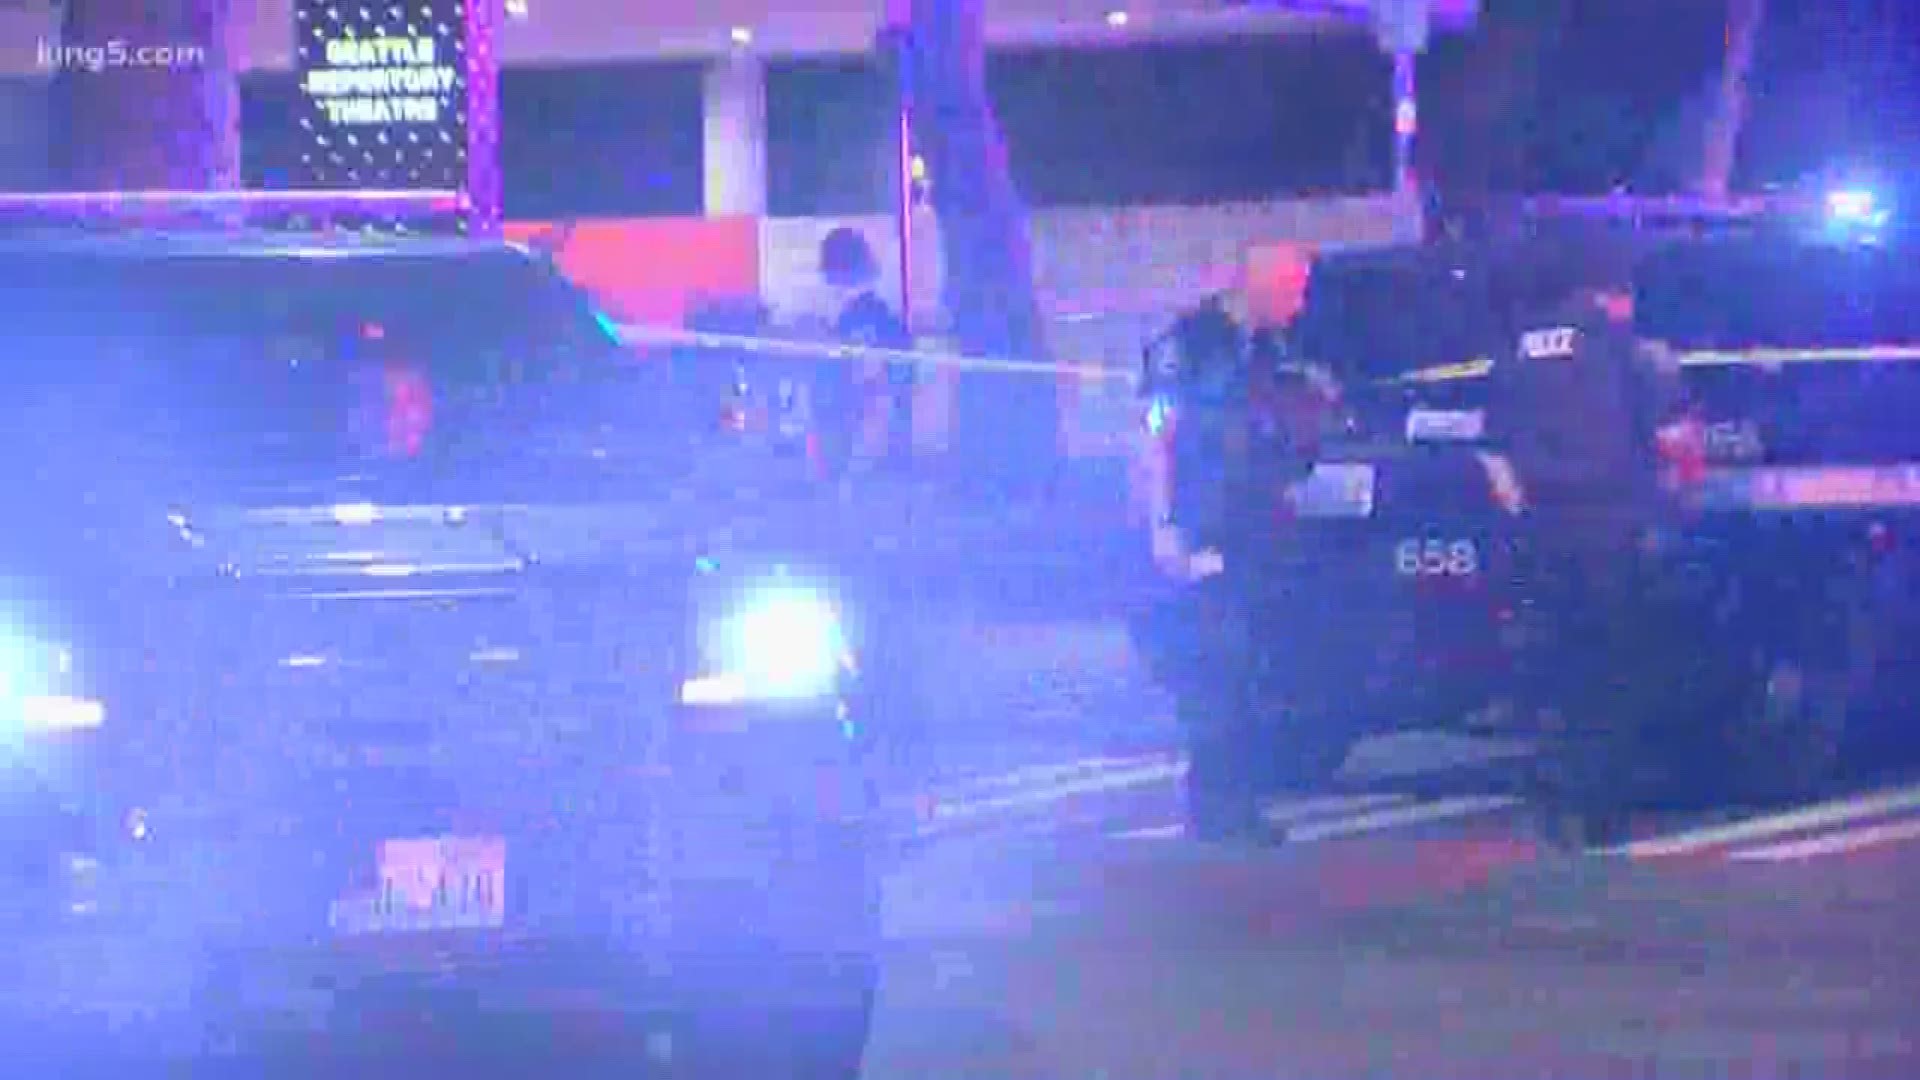 Police responded to a shooting near the Seattle Center around 2:30 a.m. Sunday. One man was rushed to the hospital in critical condition.